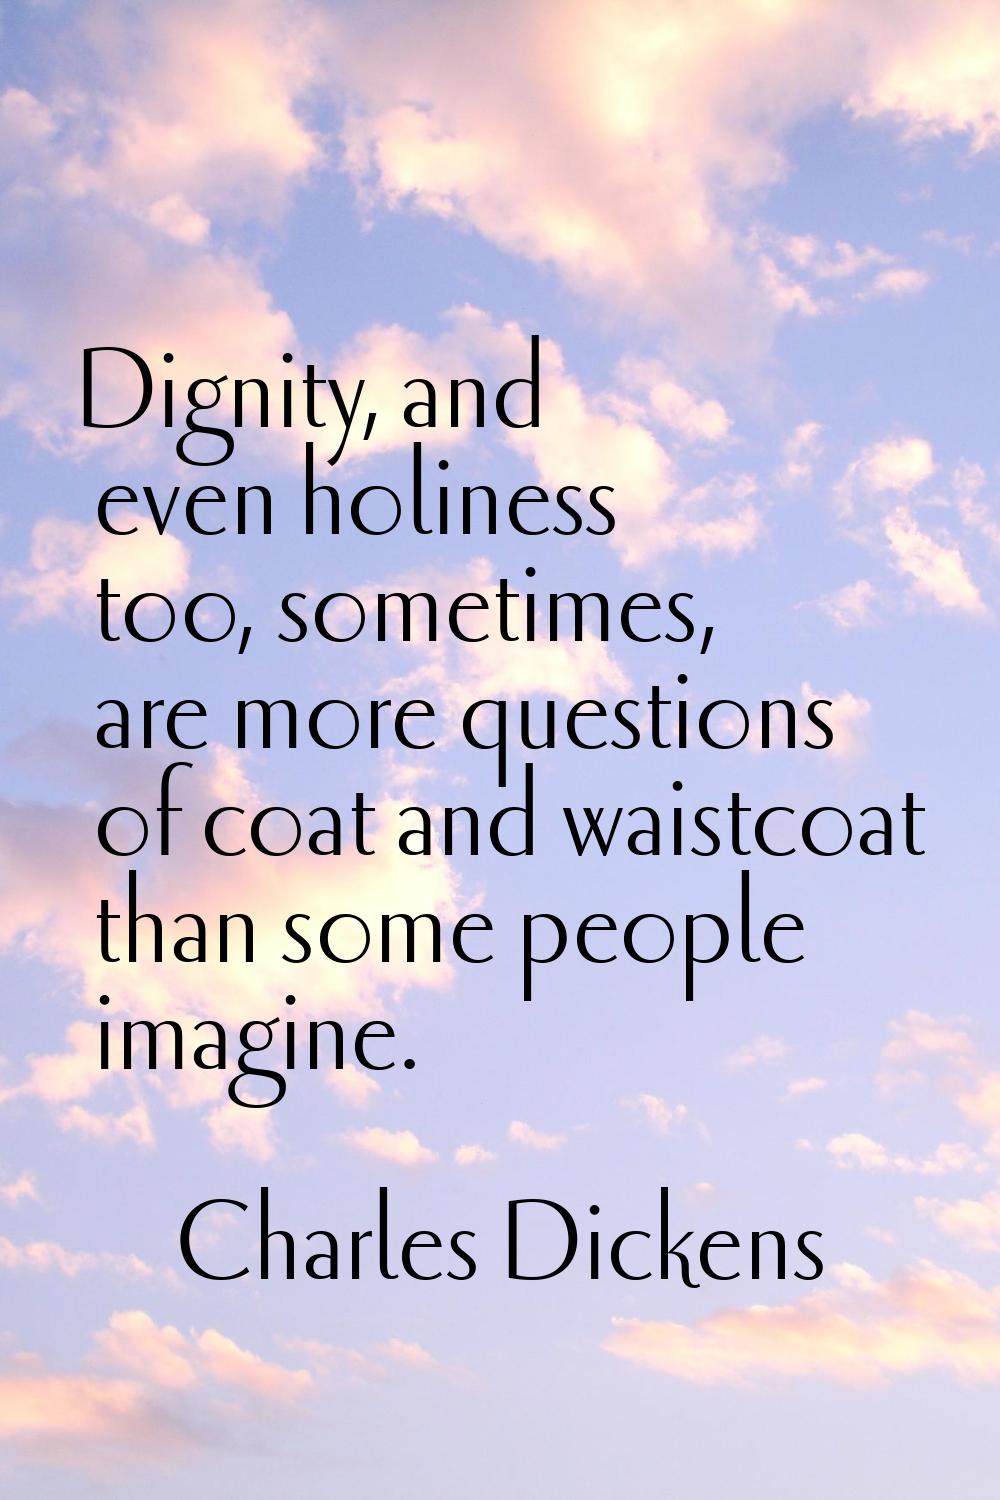 Dignity, and even holiness too, sometimes, are more questions of coat and waistcoat than some peopl